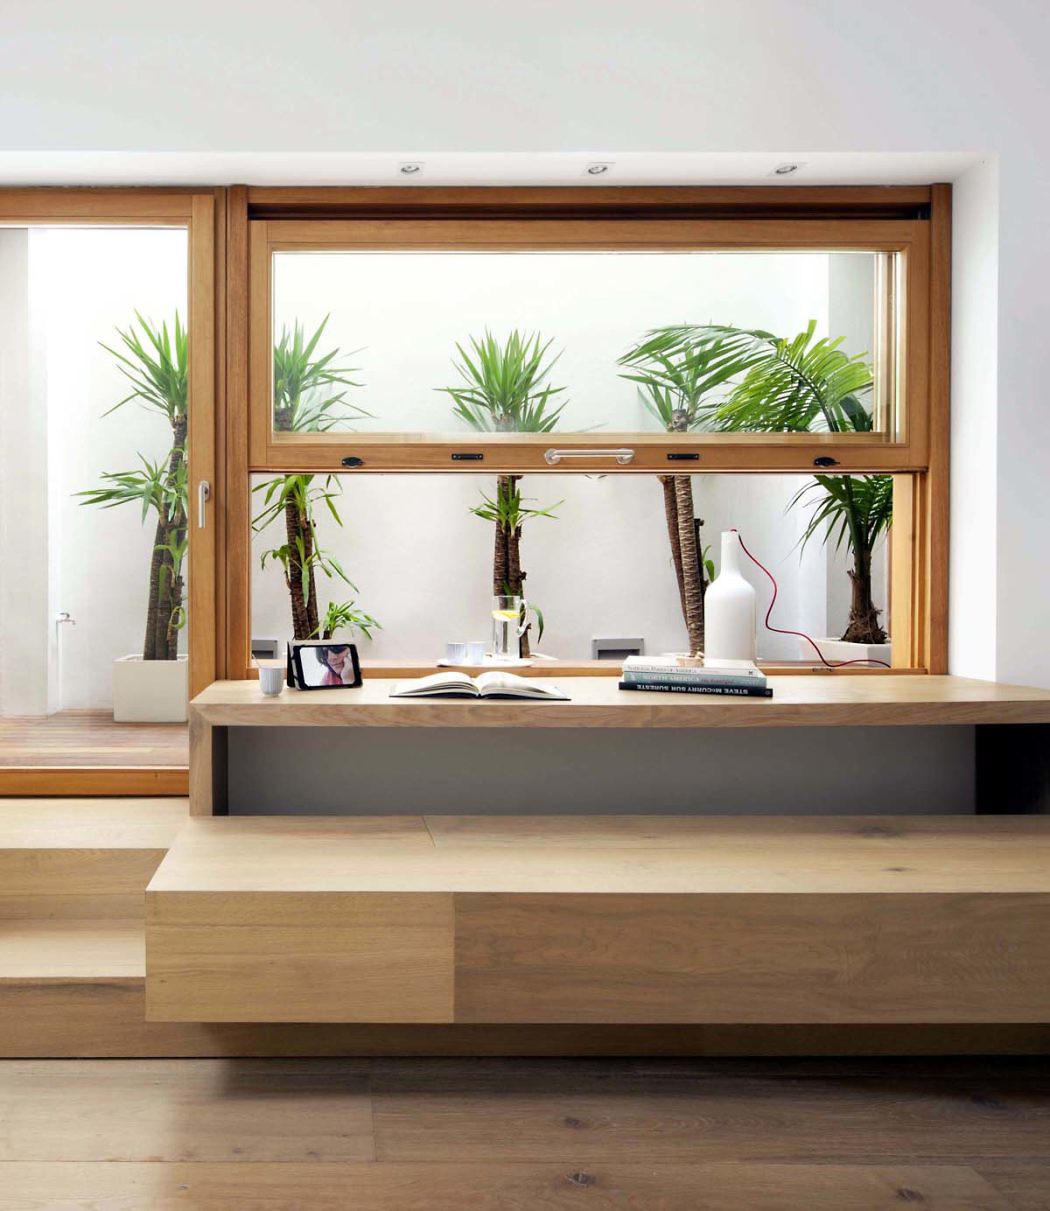 Contemporary wooden desk with plants and minimal decor.